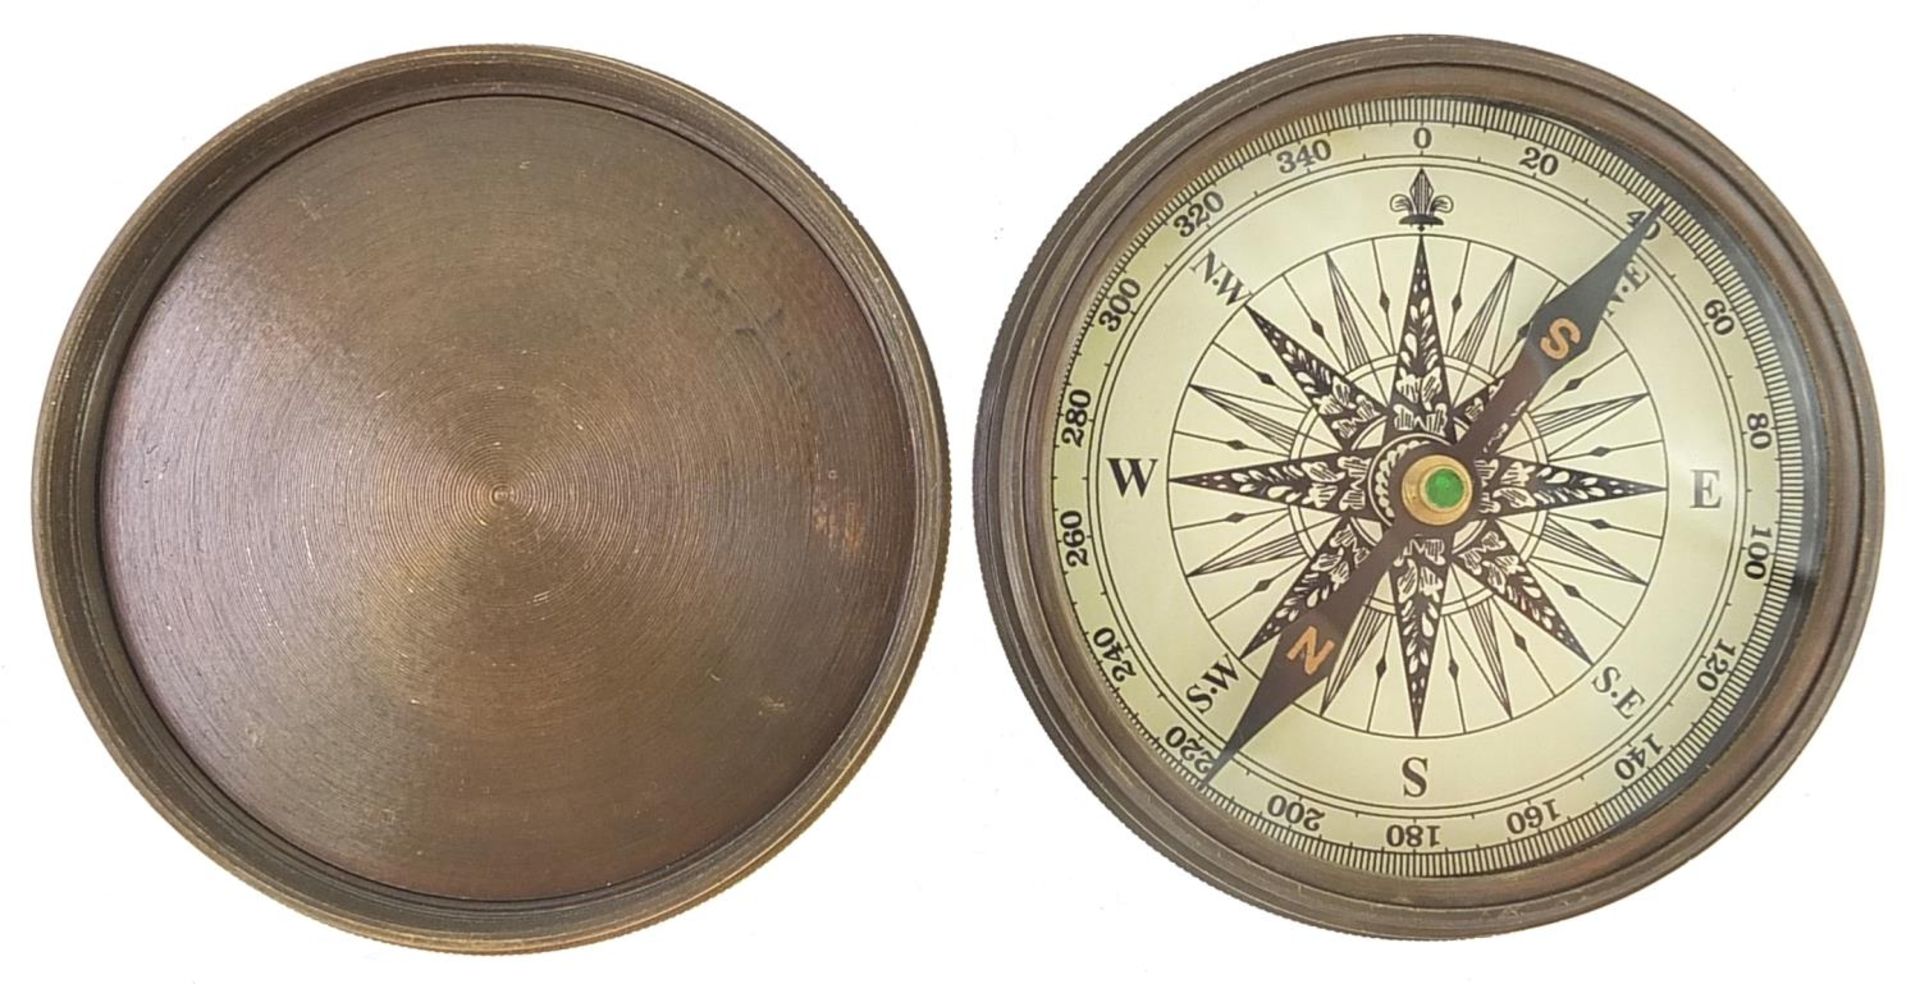 Military interest brass travelling compass, 7.5cm in diameter - Image 2 of 3